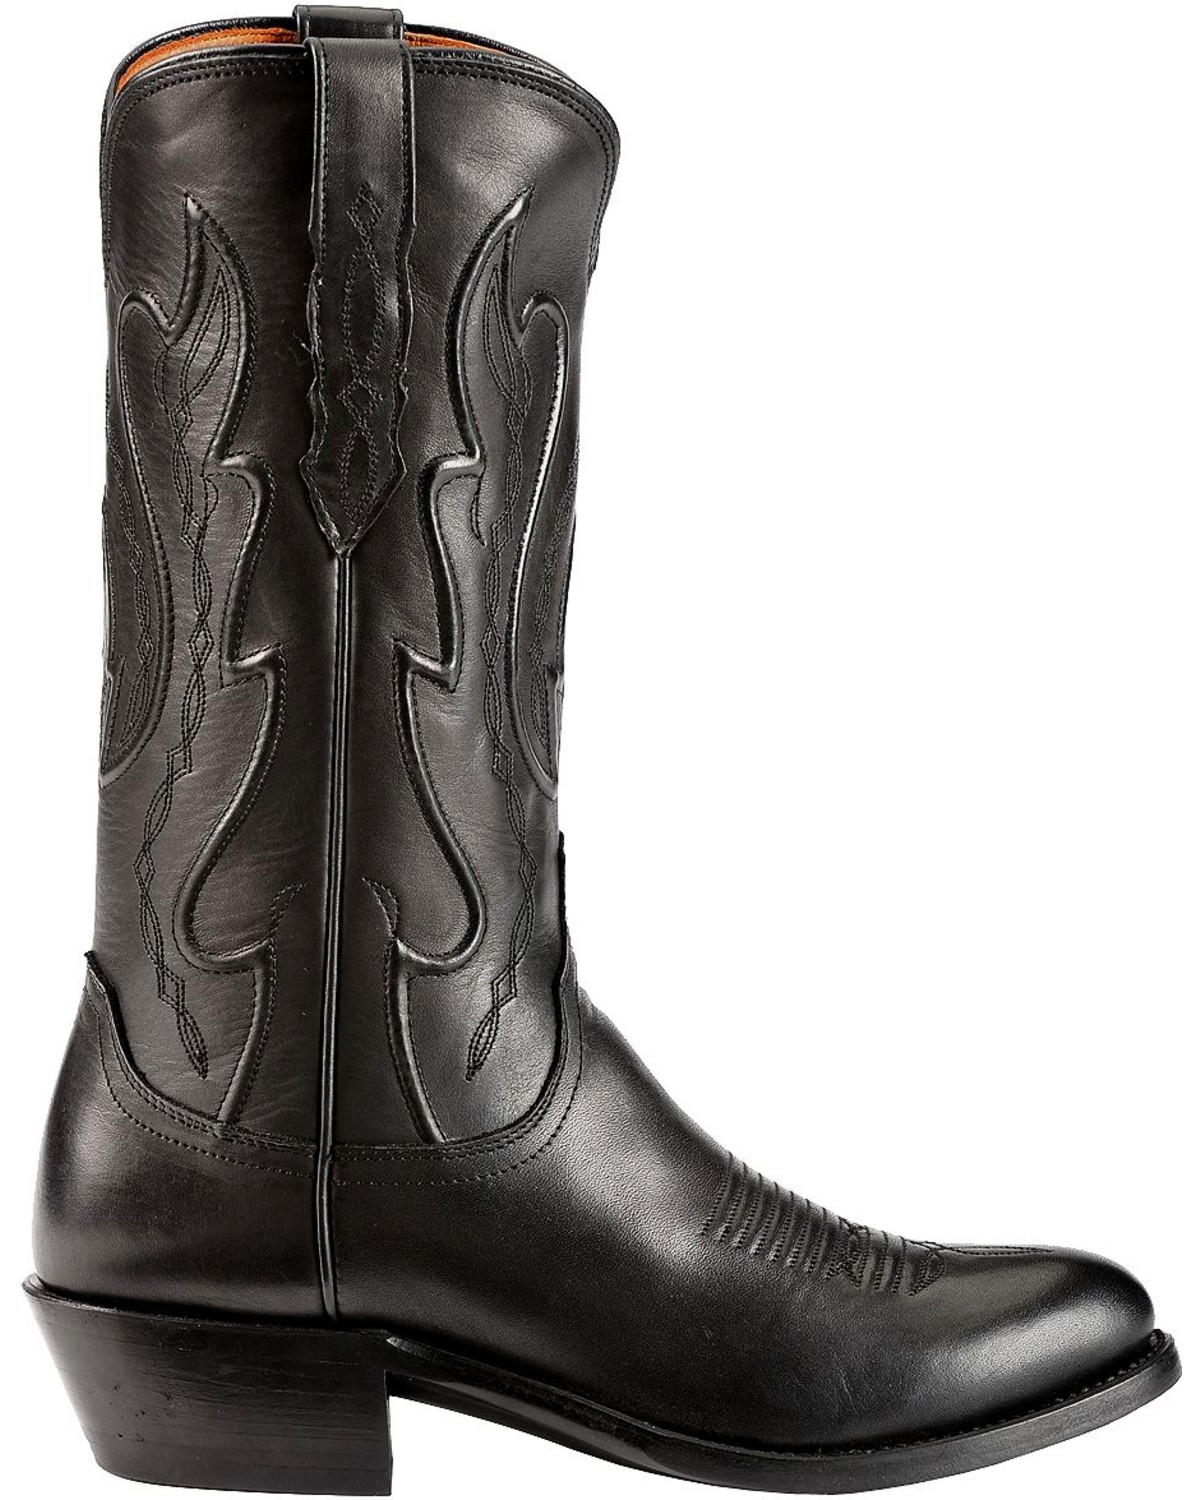 Lucchese Men's Embroidered Western Boots | Boot Barn